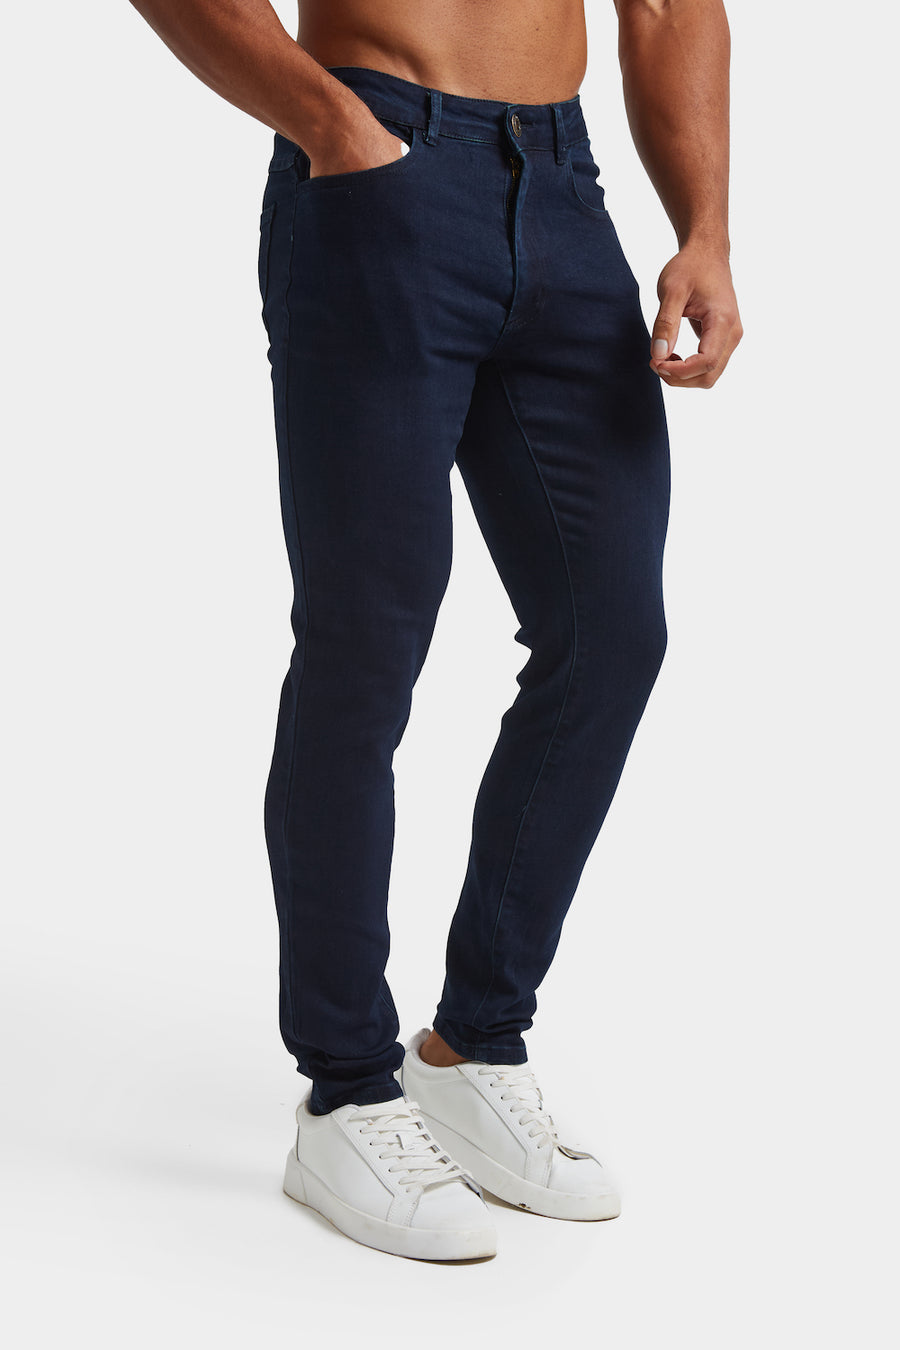 Womens Jeans - TAILORED ATHLETE - USA